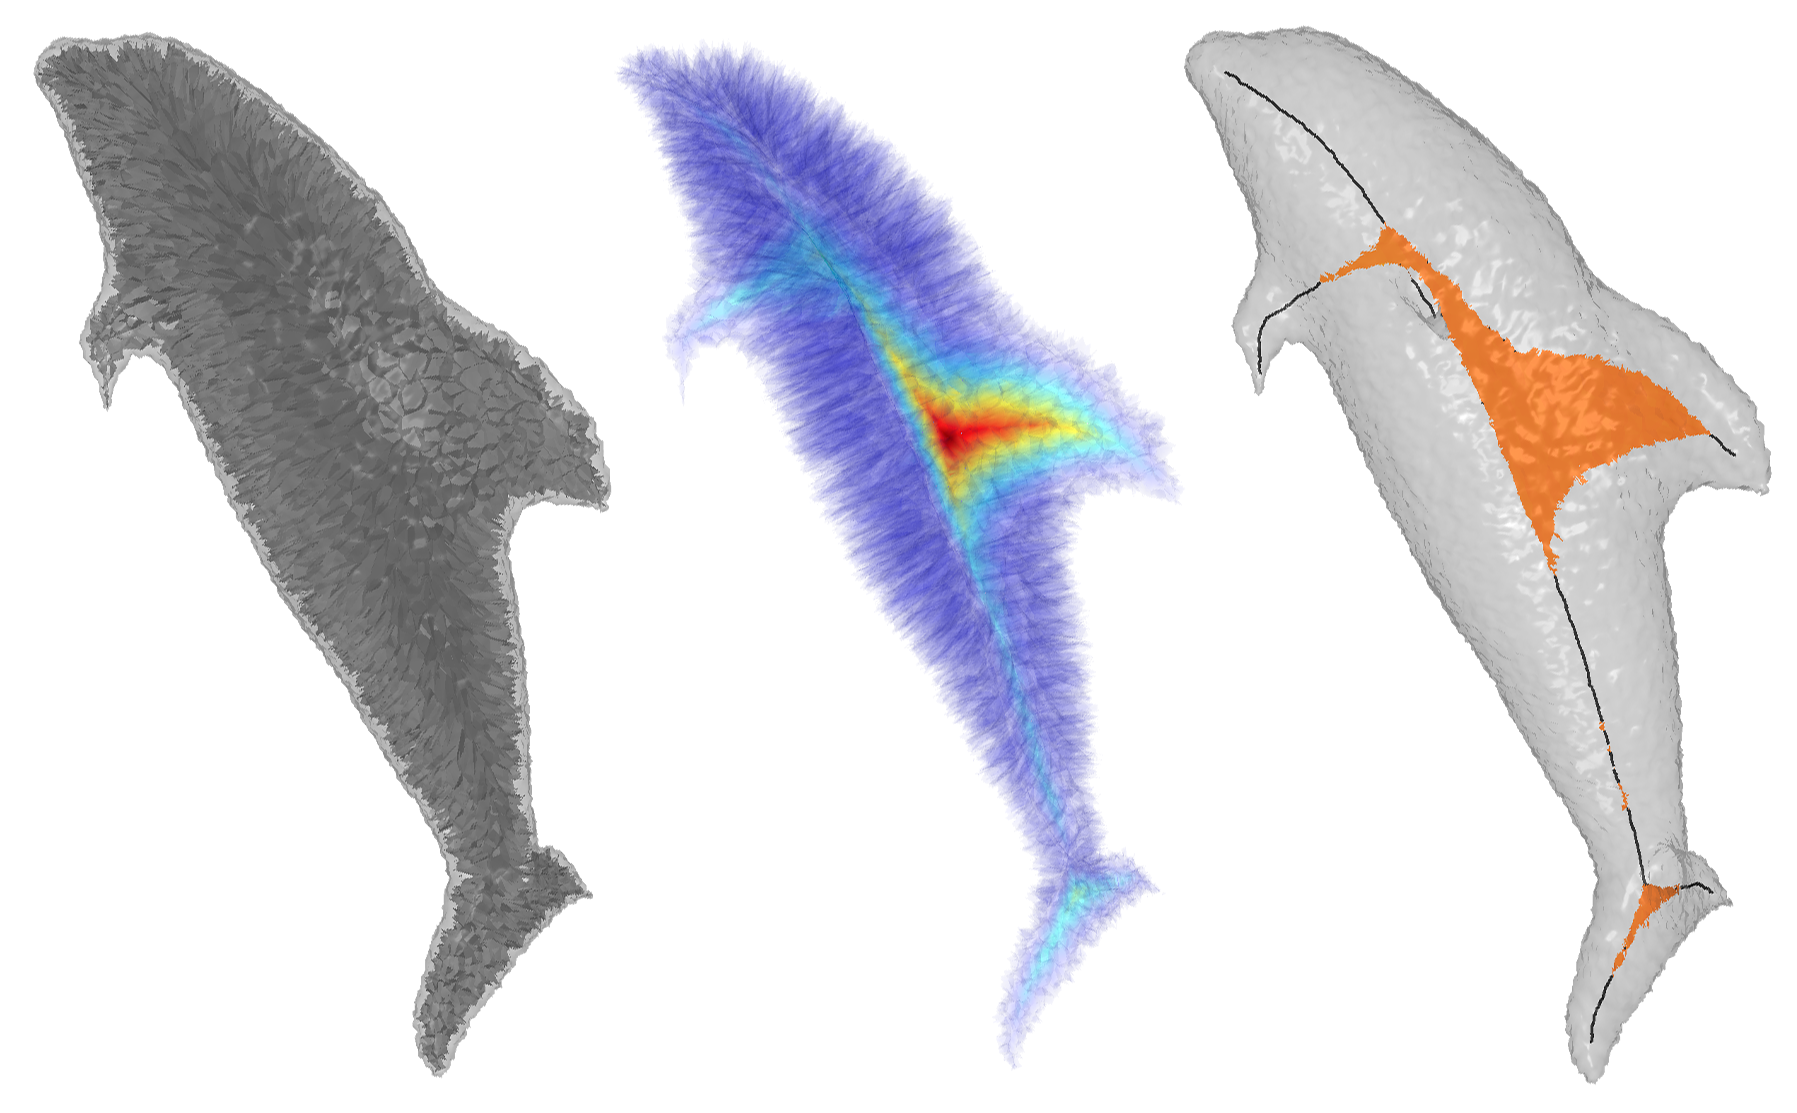 Figure 1. The medial axis of a bumpy dolphin shape contains numerous noisy branches (left). Our measure properly highlights the important subset of the medial axis (middle). Guided by the measure, a skeleton is generated that features both surfaces and curves capturing planar and tubular parts of the shape.